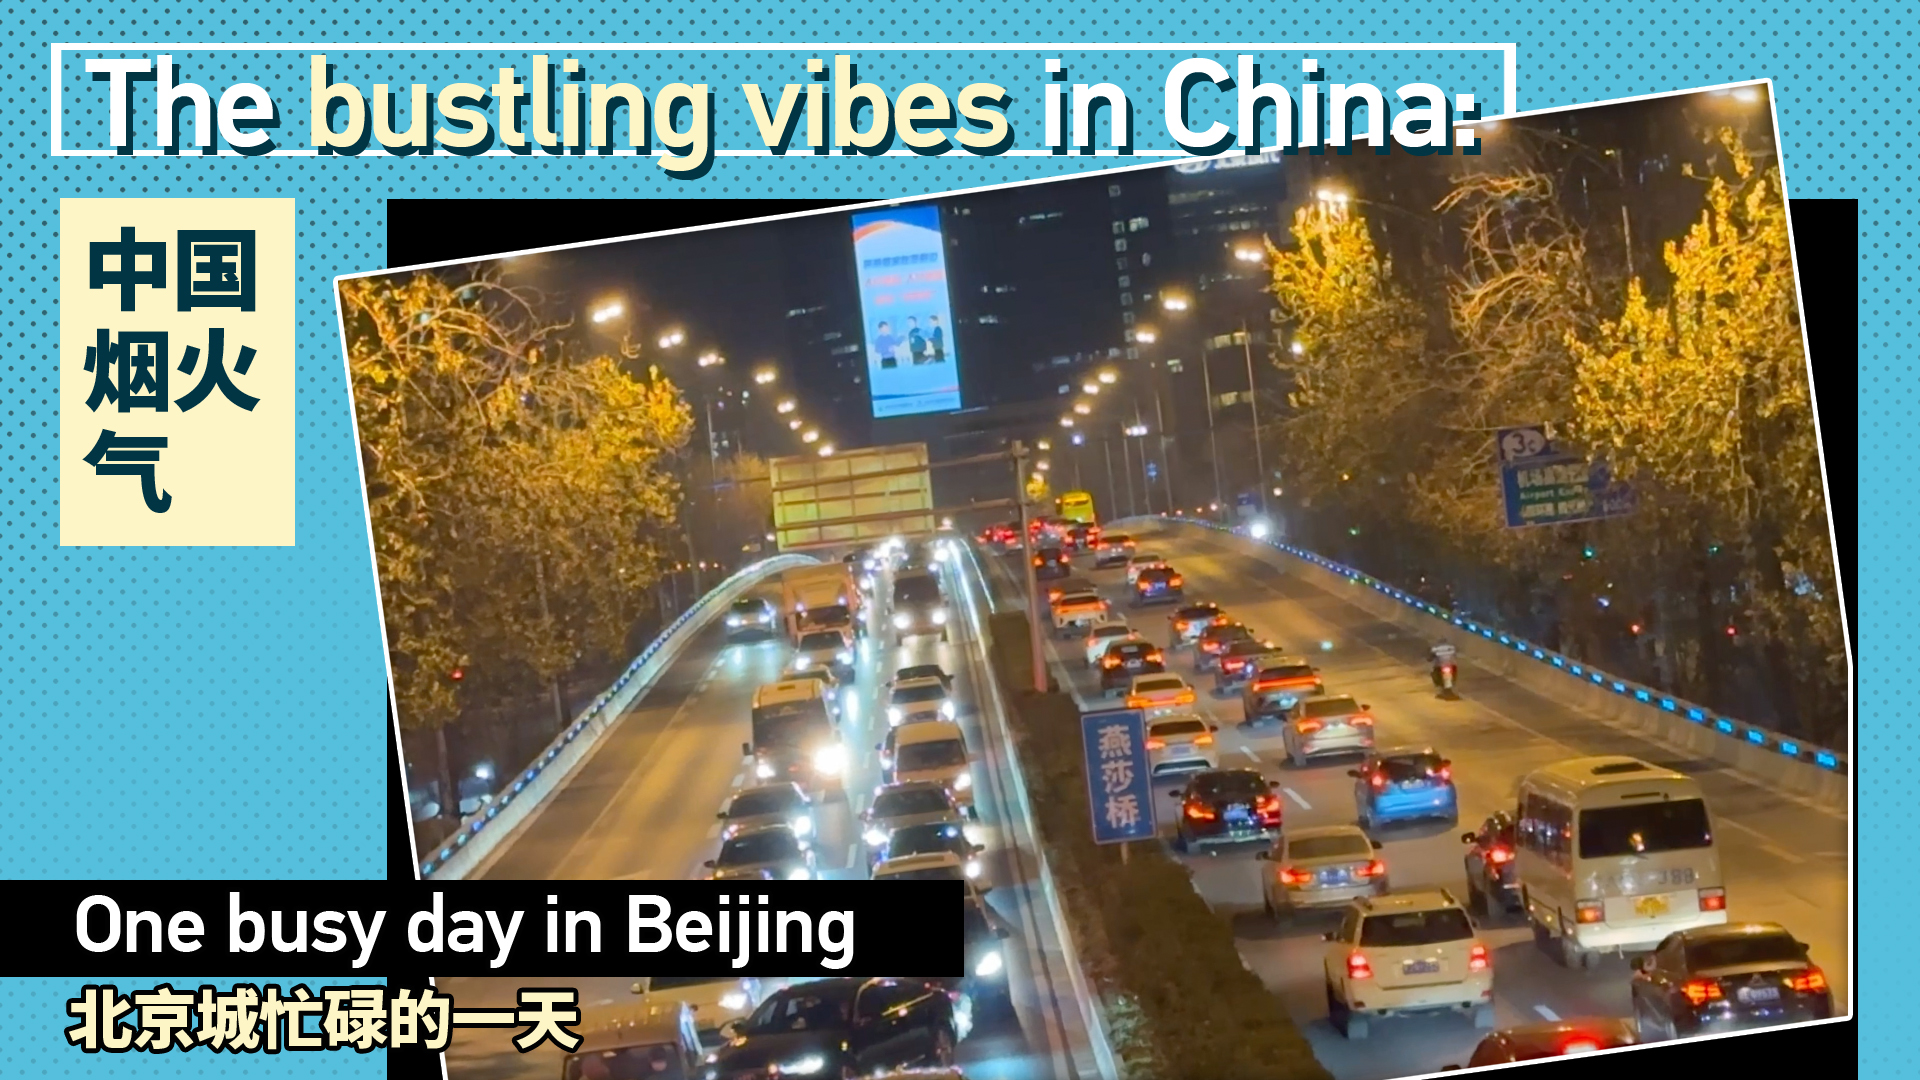 The bustling vibes in China: One busy day in Beijing